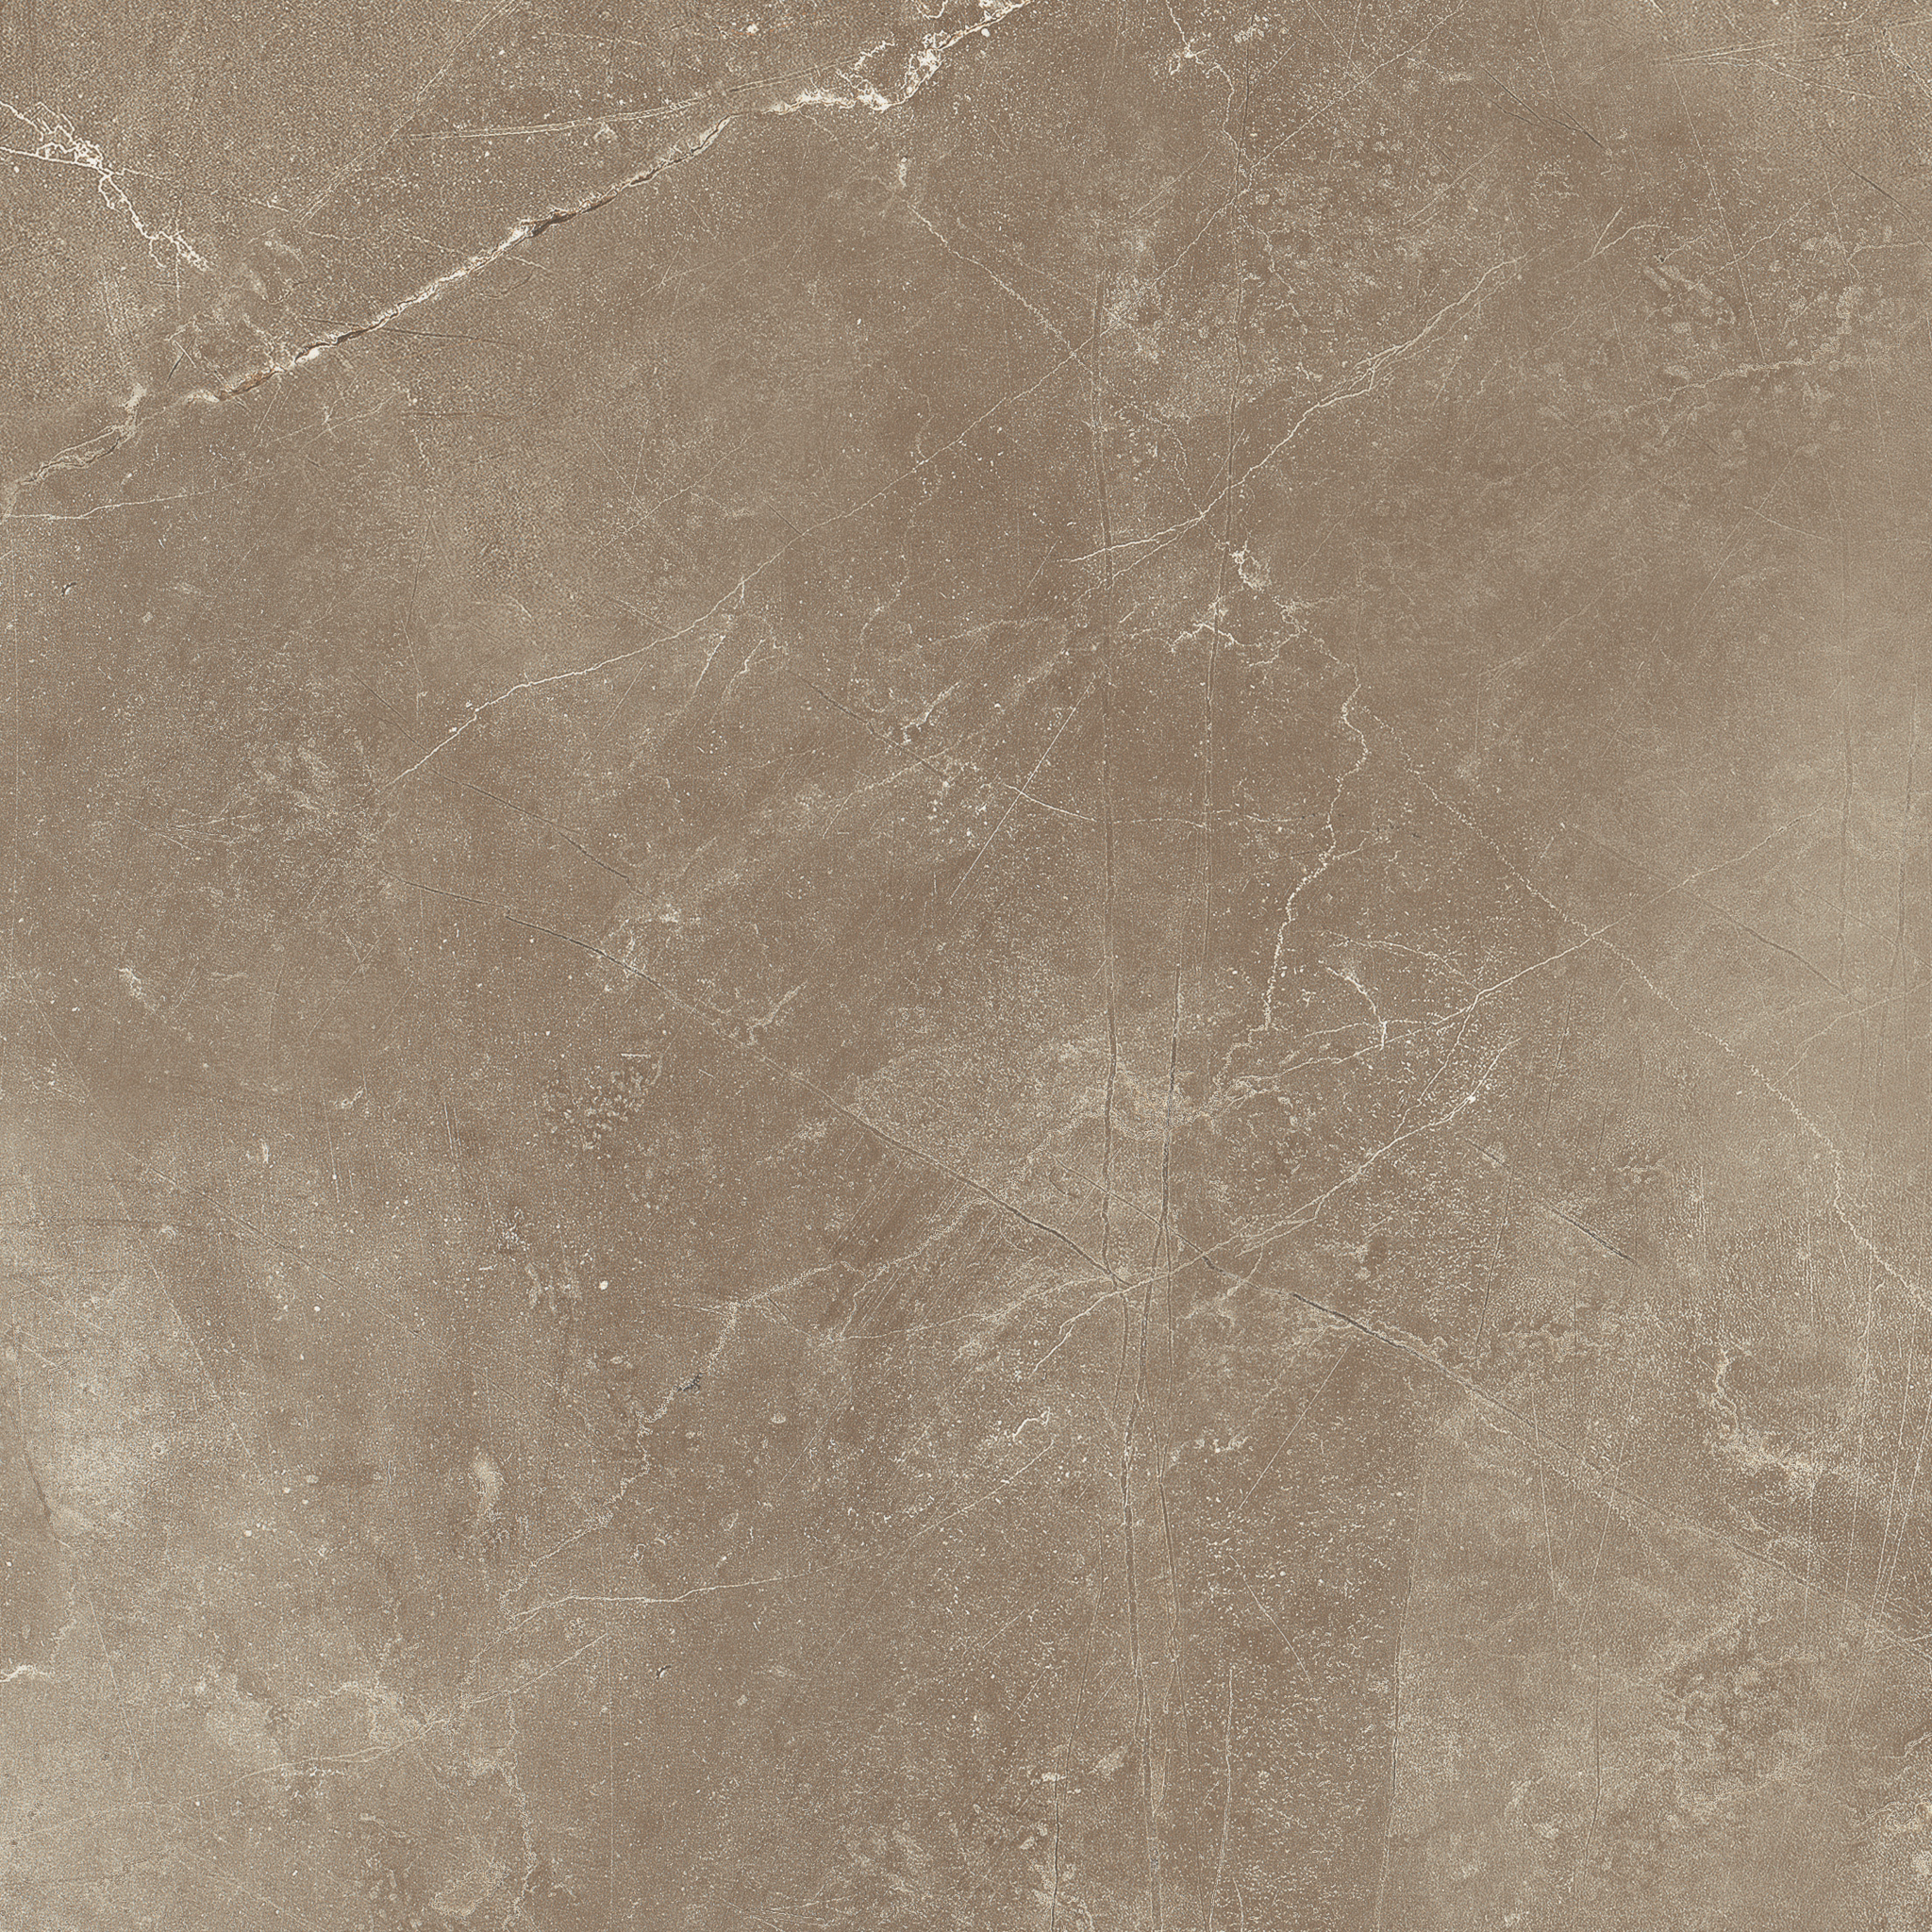 pulpis moca pattern glazed porcelain field tile from classic anatolia collection distributed by surface group international matte finish pressed edge 12x12 square shape